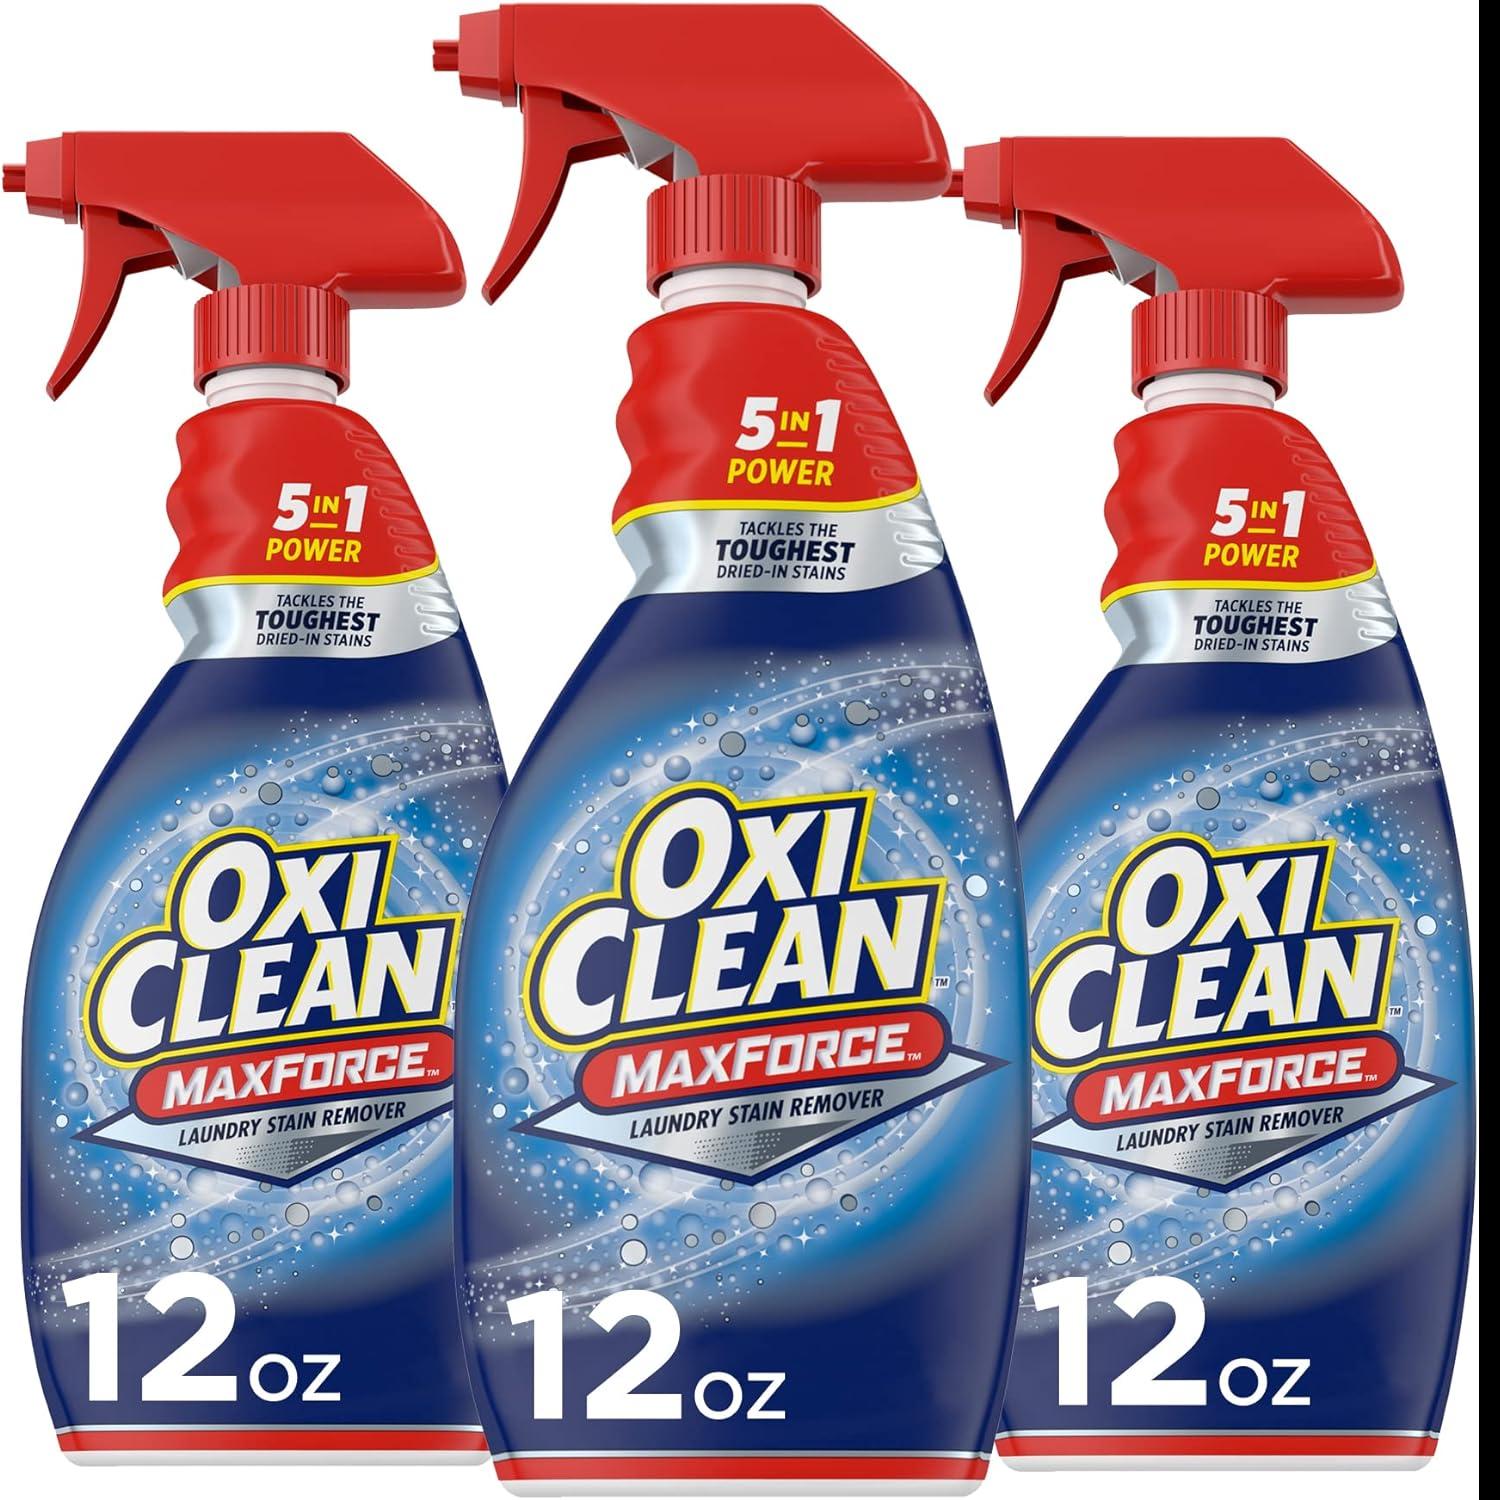 Oxi Clean Max Force Laundry Stain Remover Spray 3 Pack for $9.09 Shipped